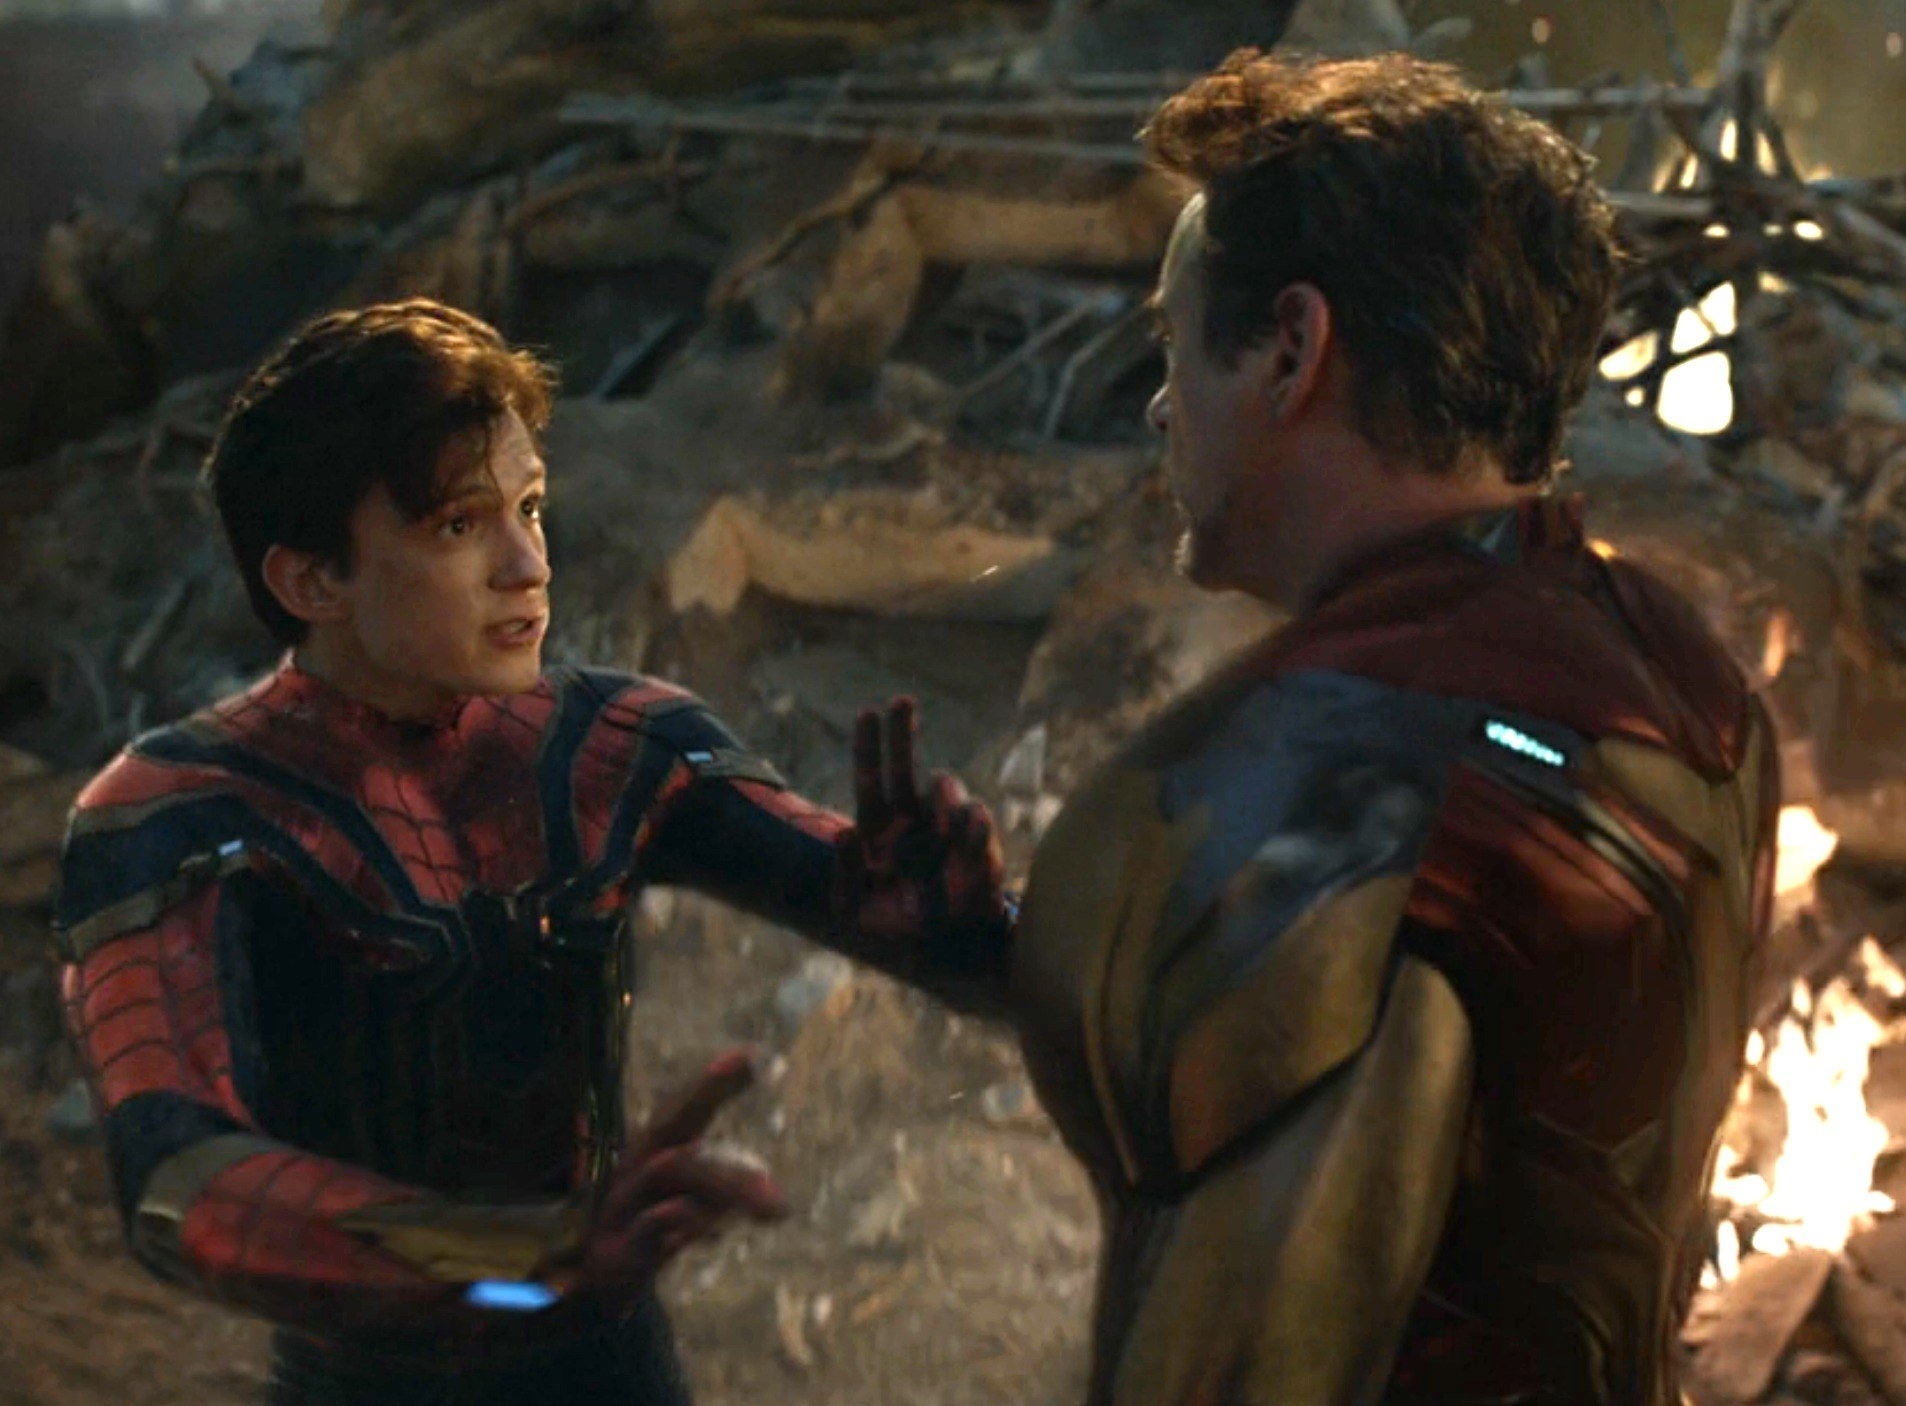 Tom Holland as Spider-Man with Robert Downey Jr. as Ironman